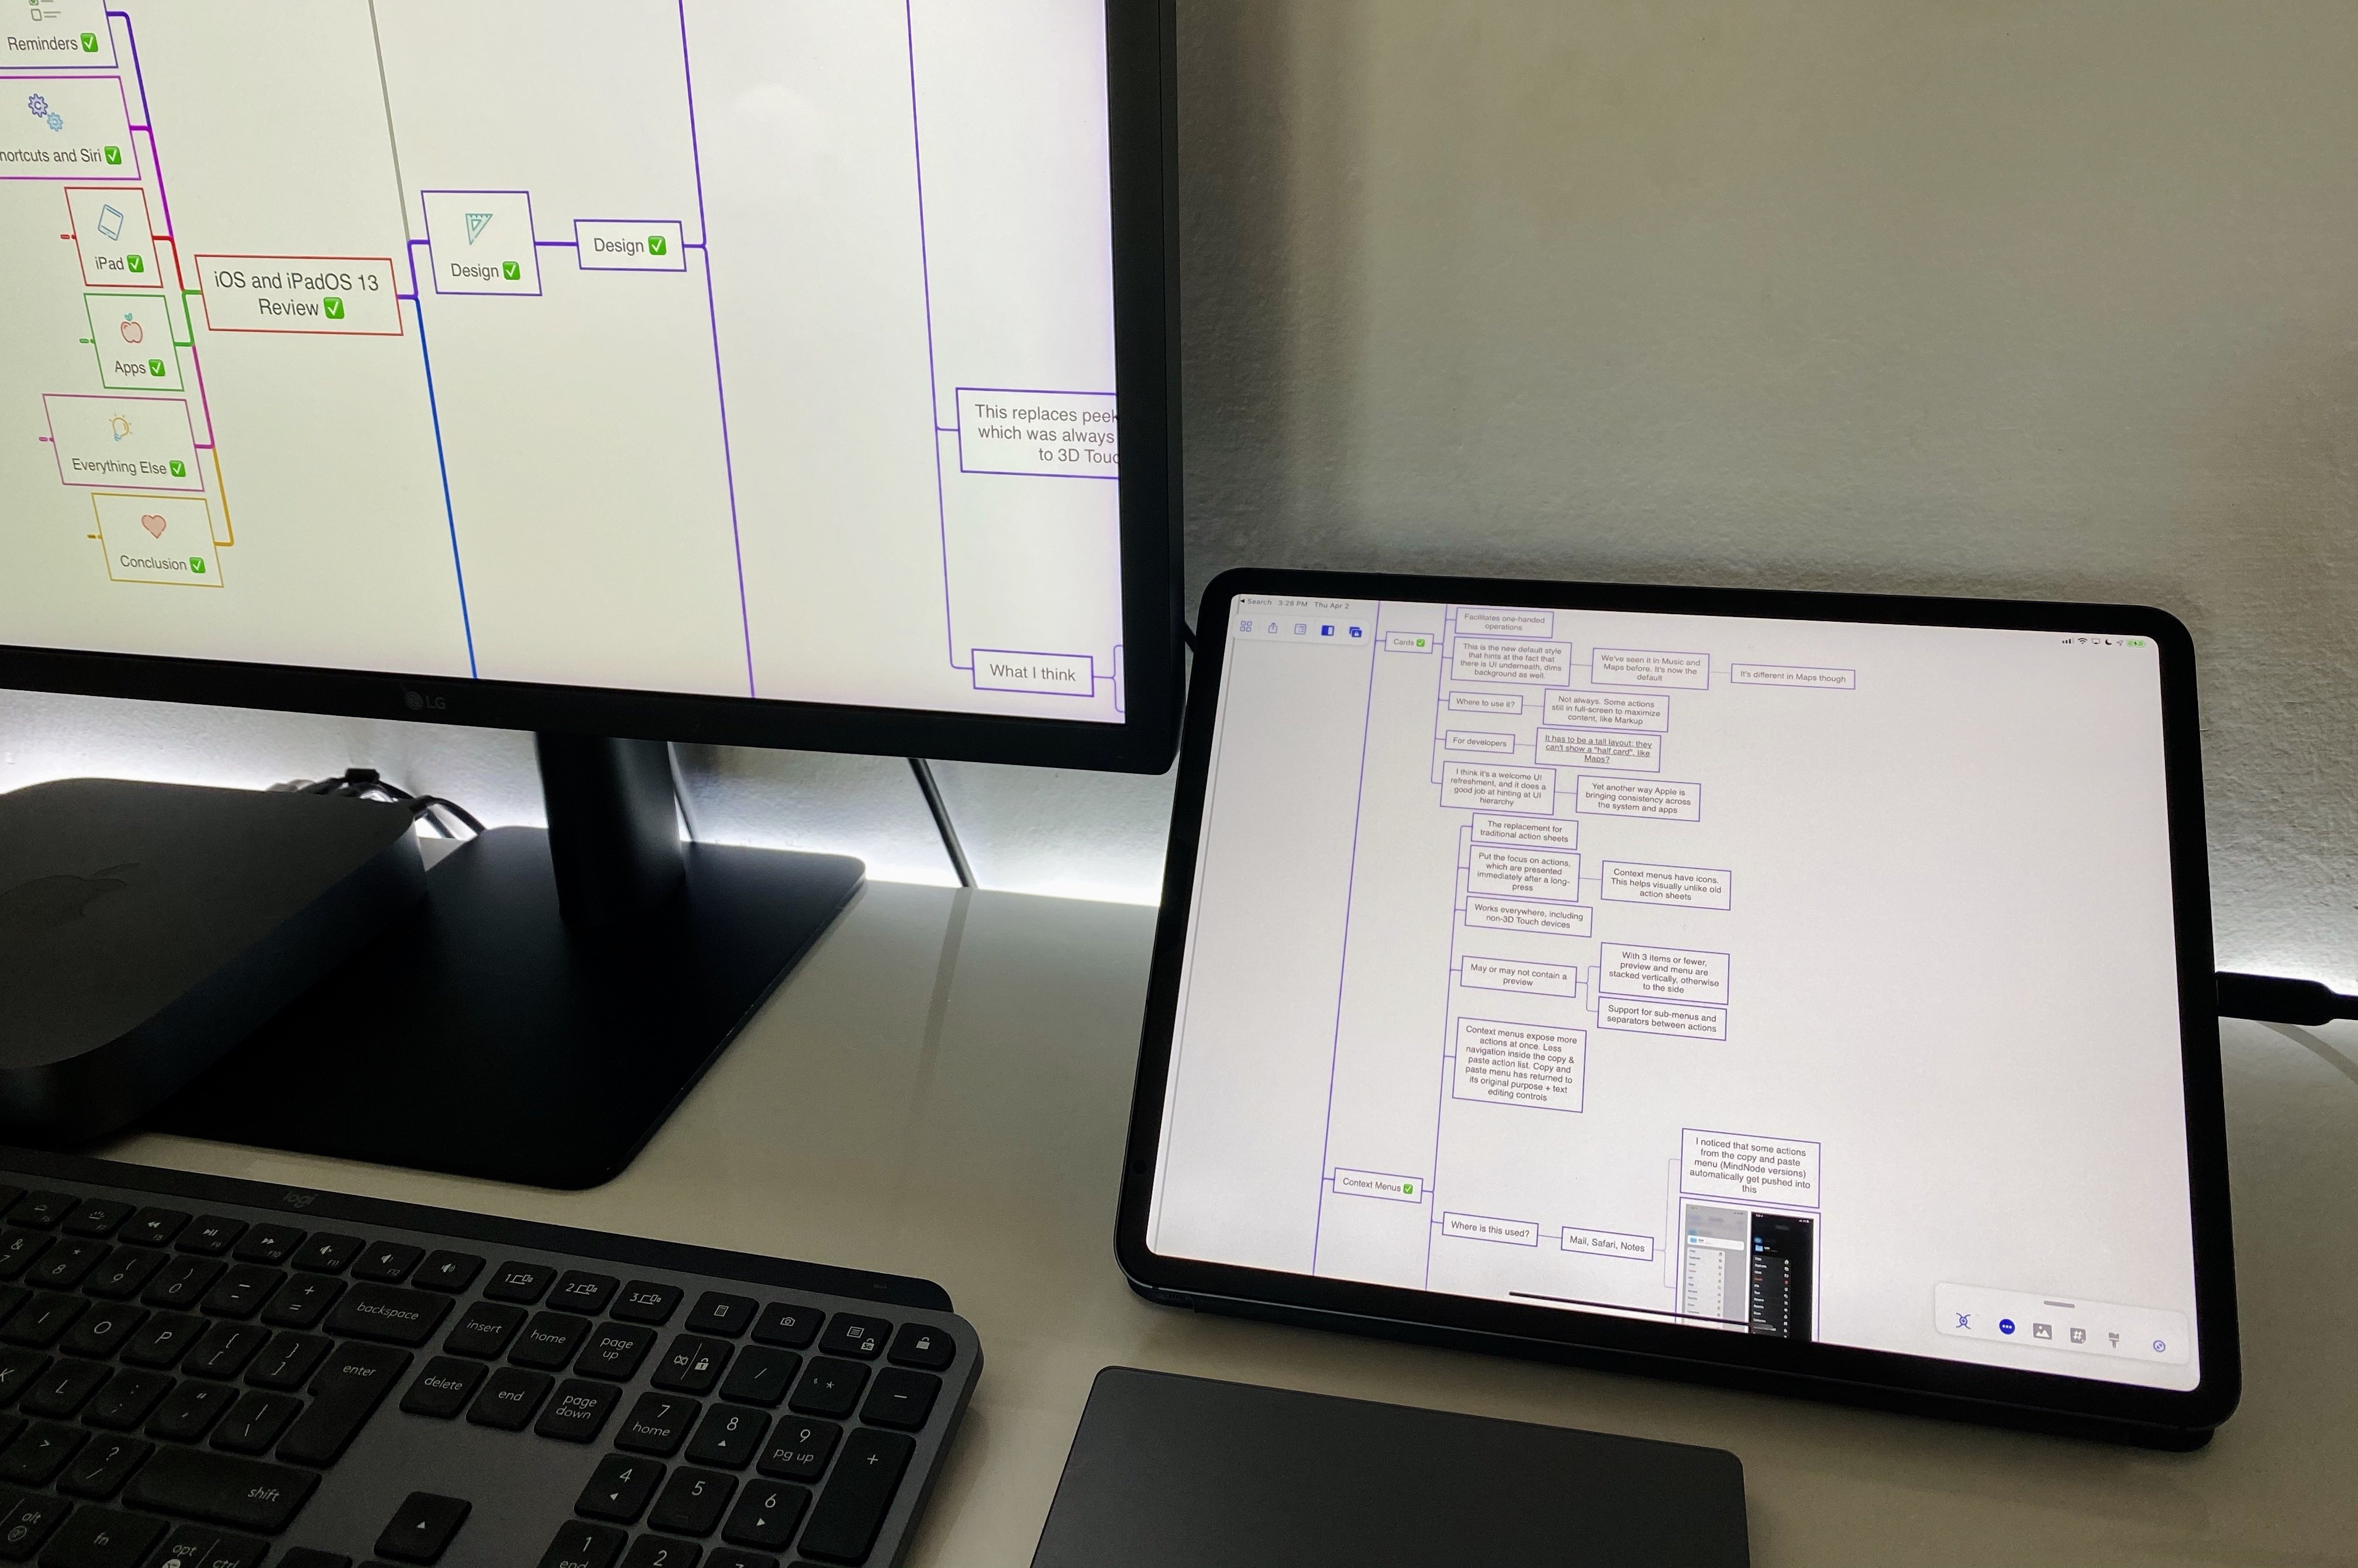 MindNode can output a full-screen map to the external display.